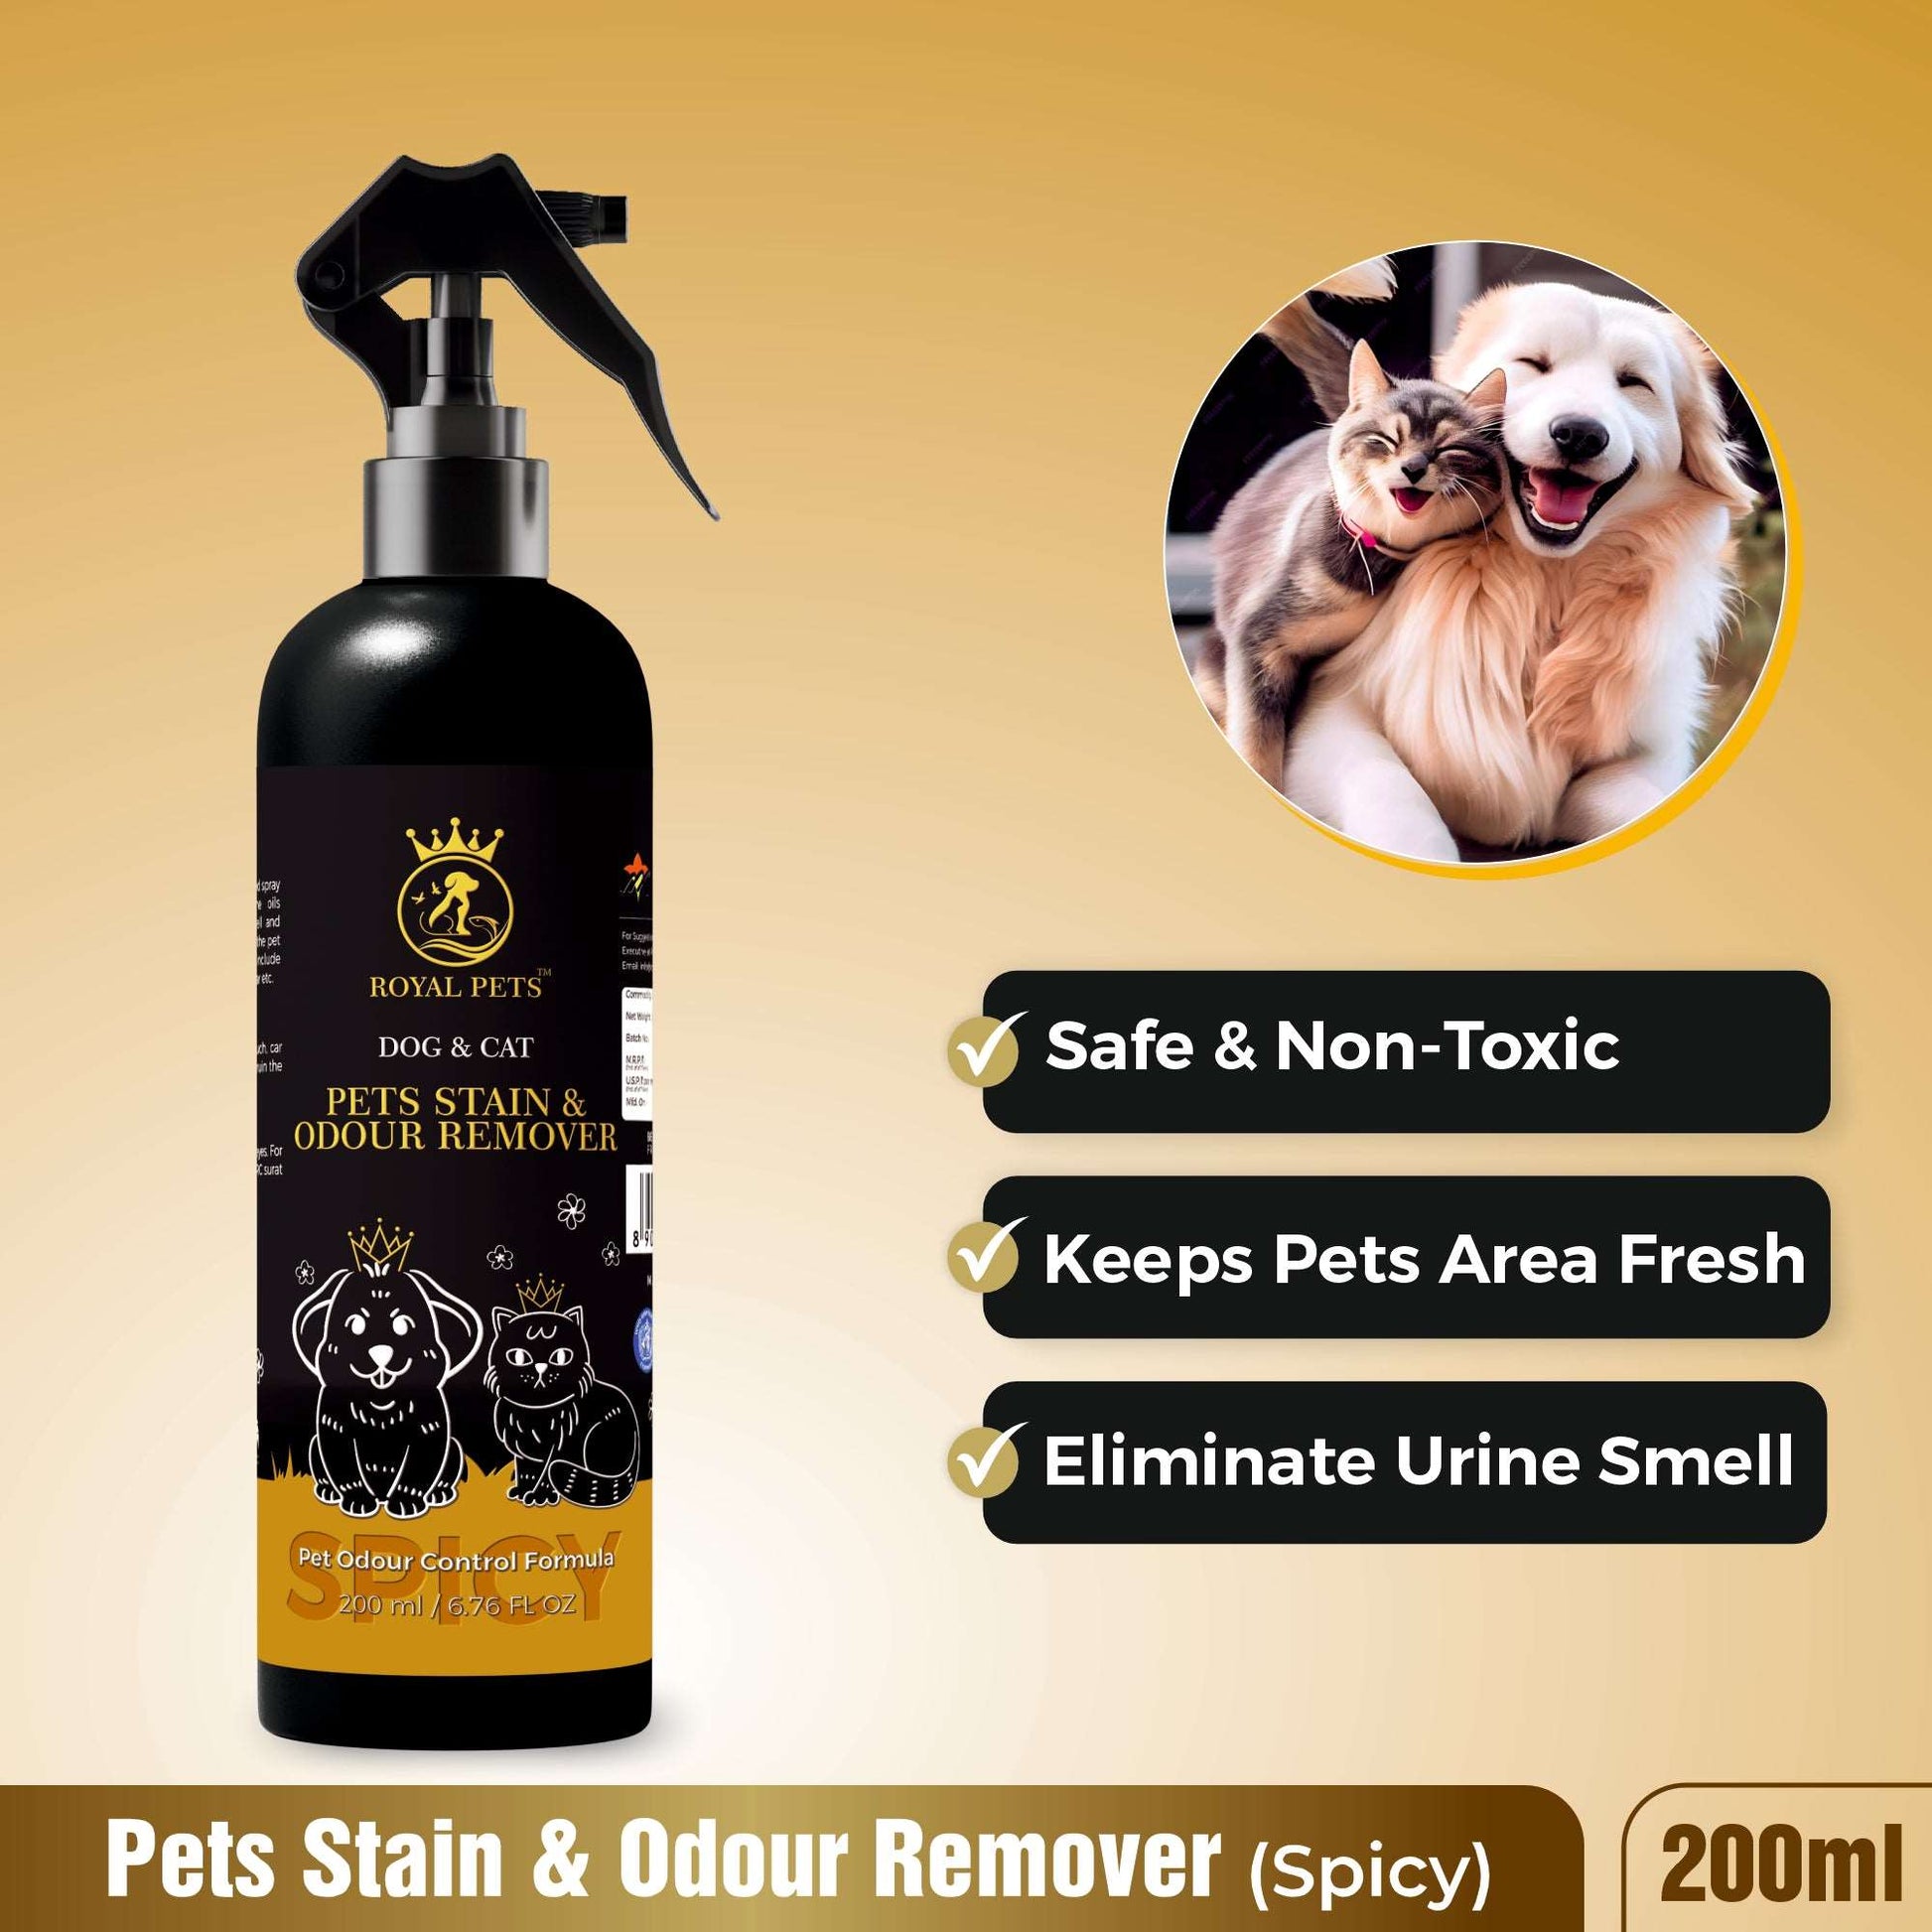 Dog & Cat Stain and Odour Remover | 200 ml